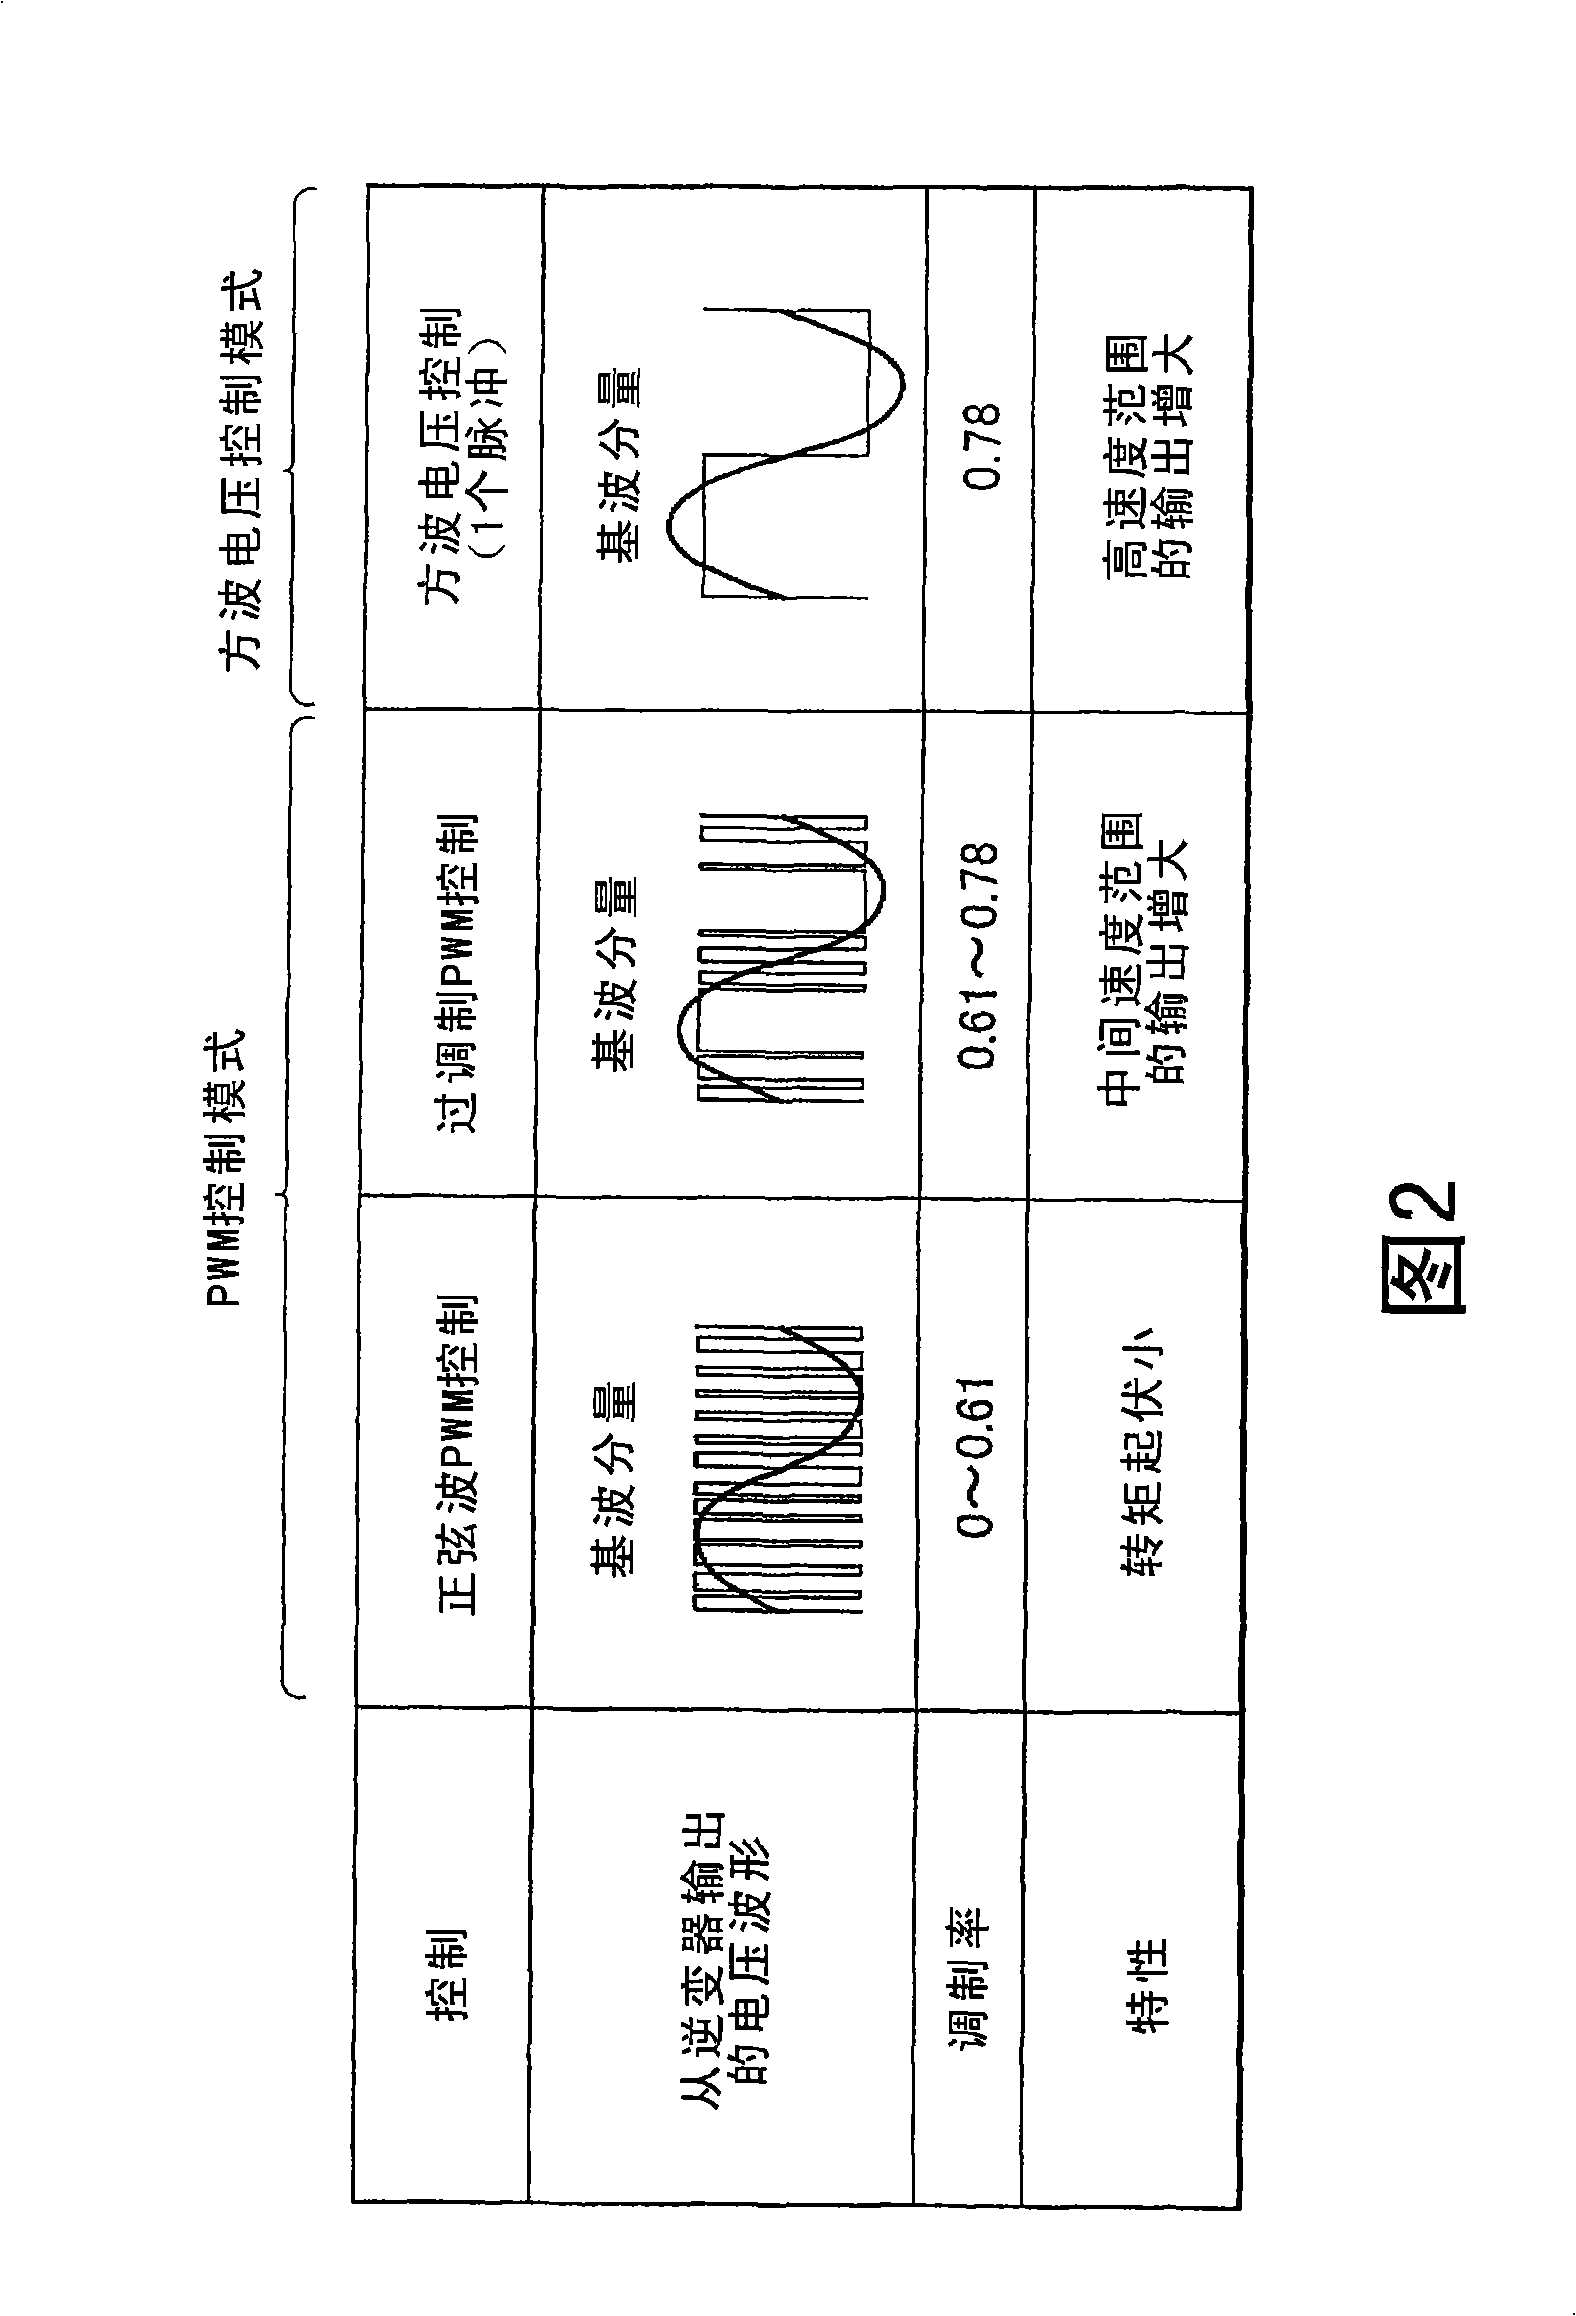 Control apparatus and method for motor drive system